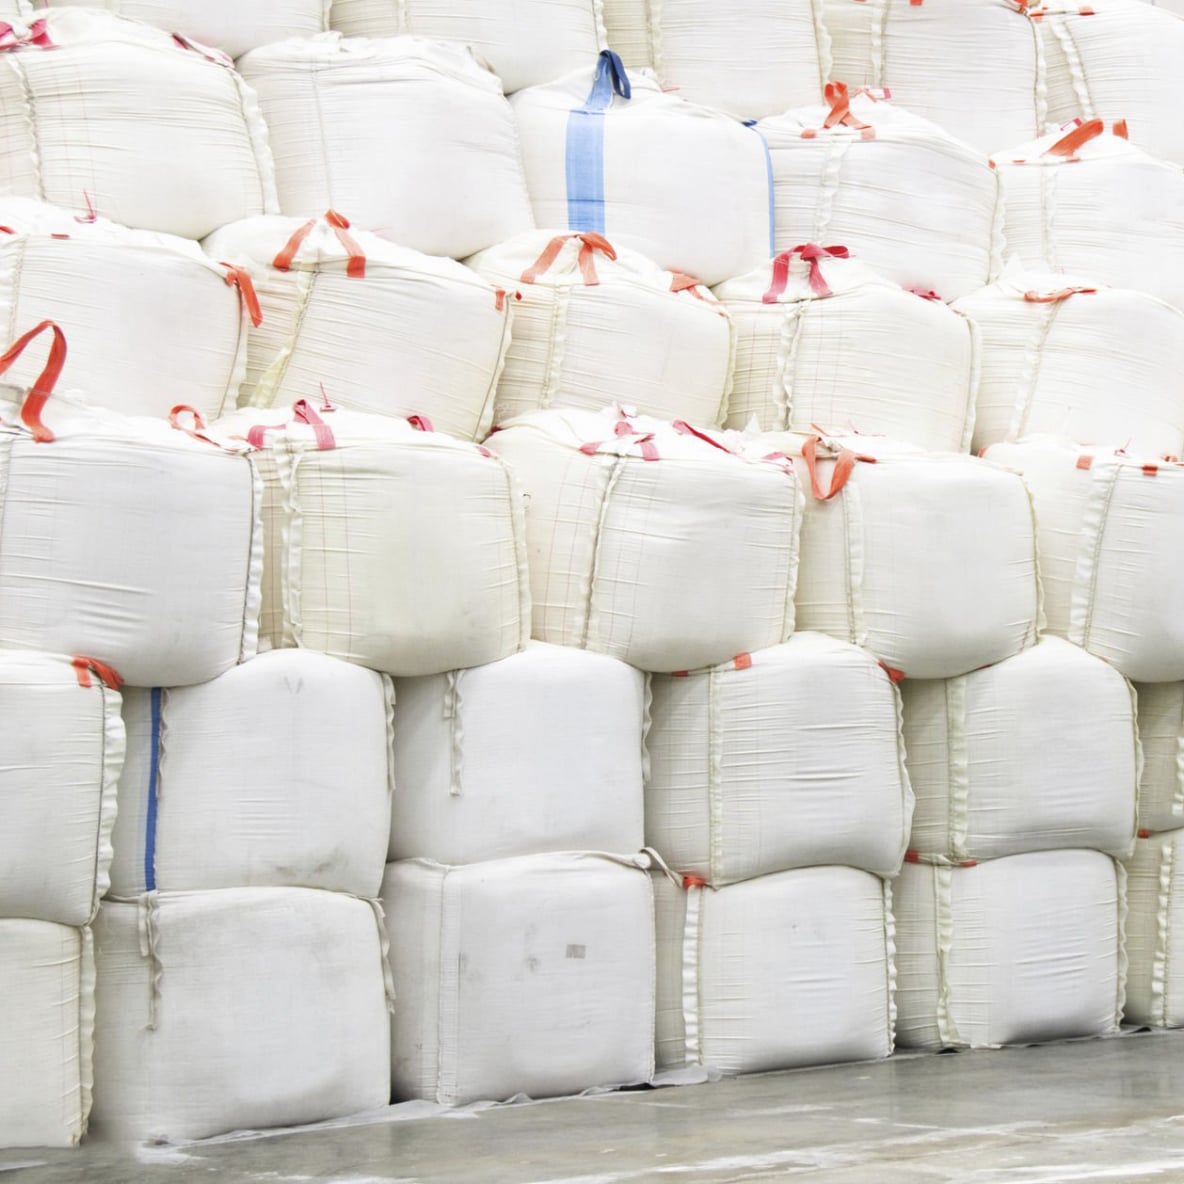 Bags of high-quality ICUMSA 45 cane sugar stacked at our Brazilian refinery.